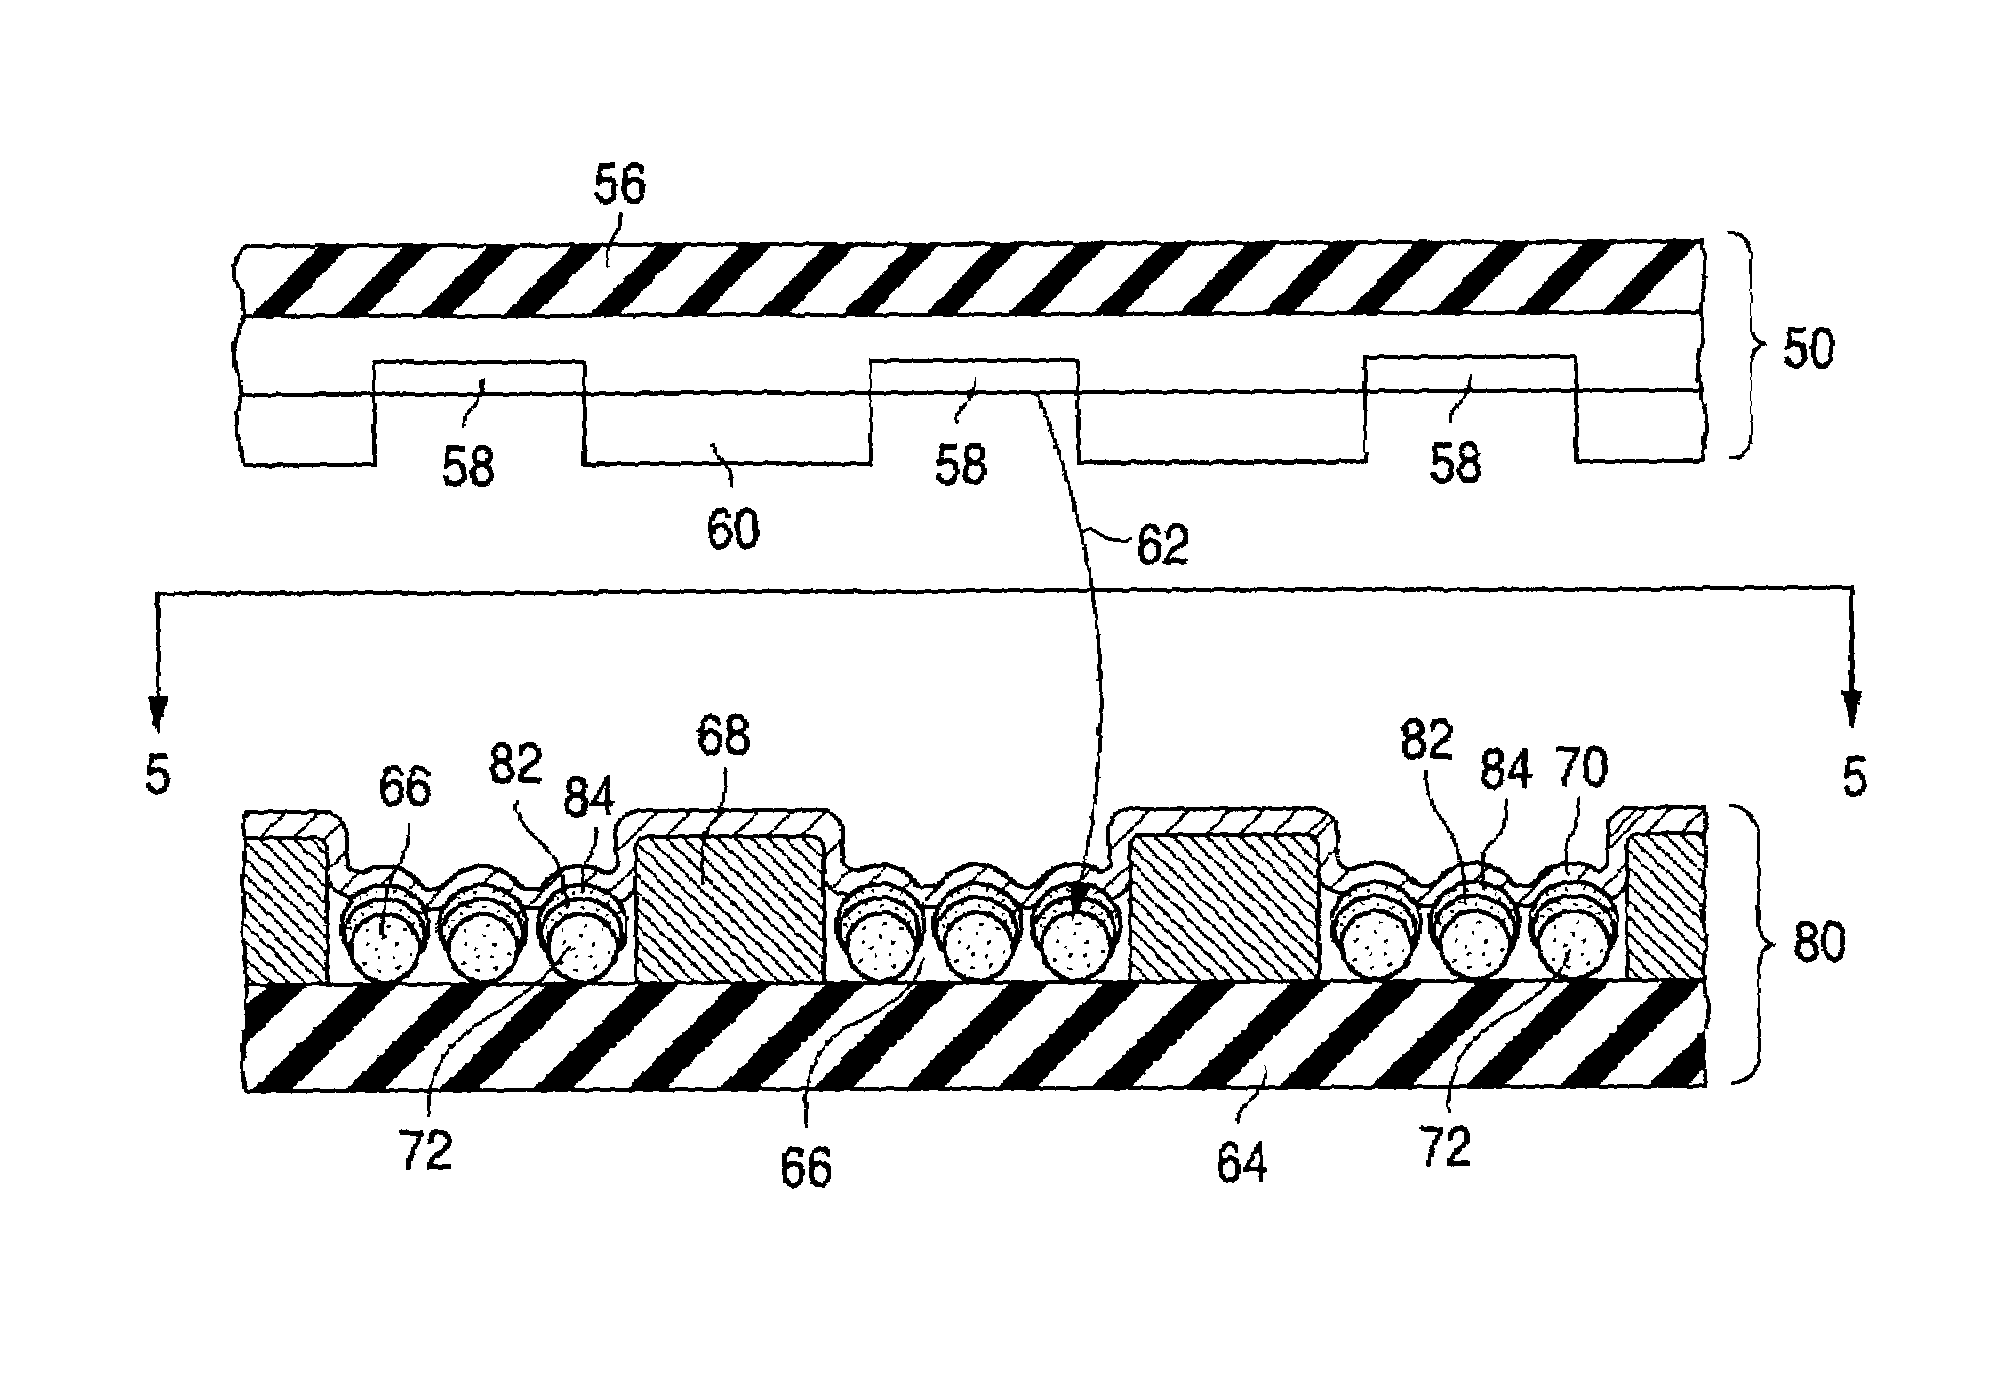 Light-emitting device having light-emissive particles partially coated with intensity-enhancement material